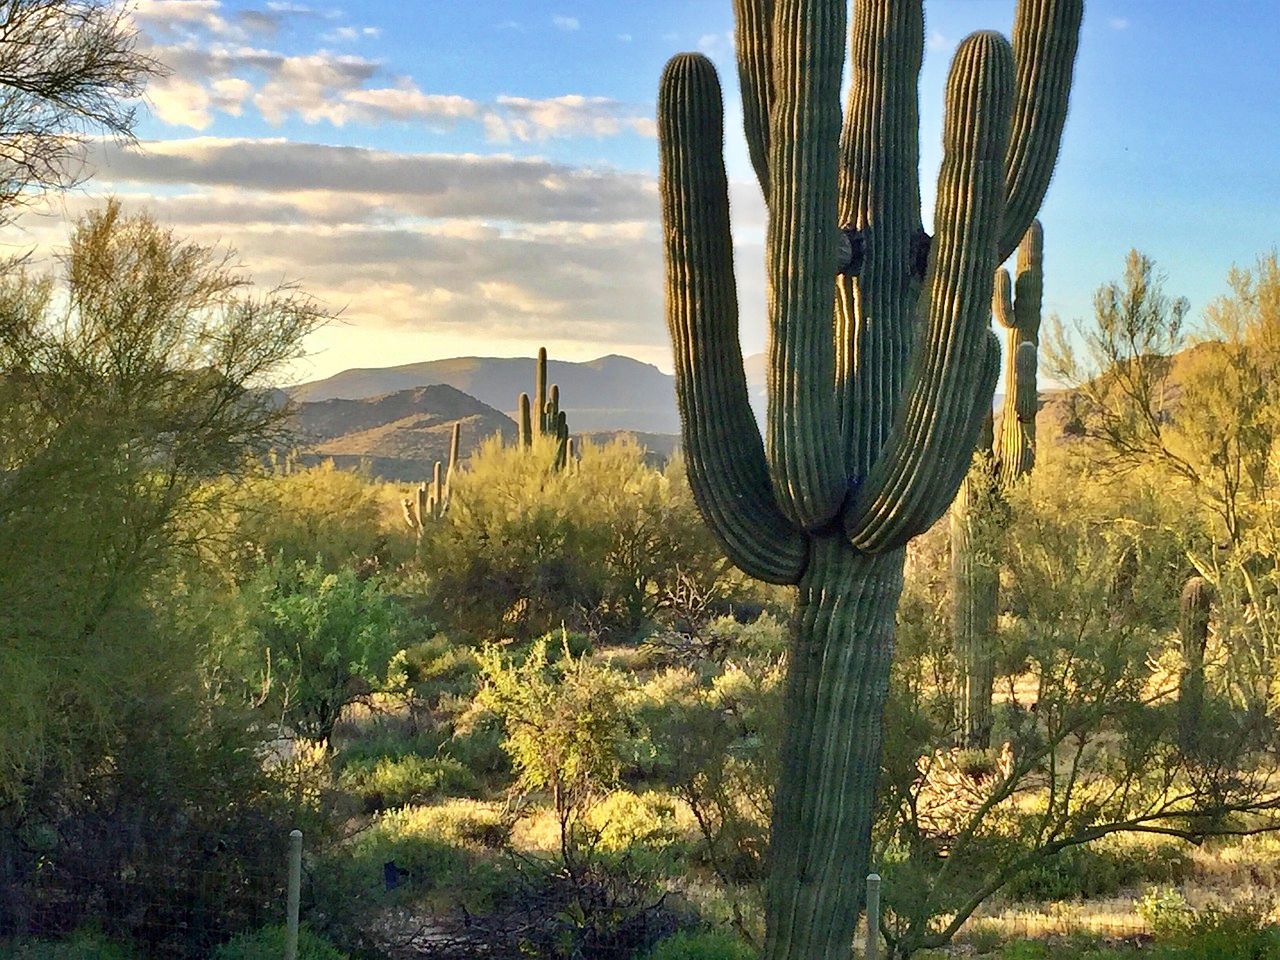 Tallest cacti in Saguaro National Park, one of the warmest national parks in winter.